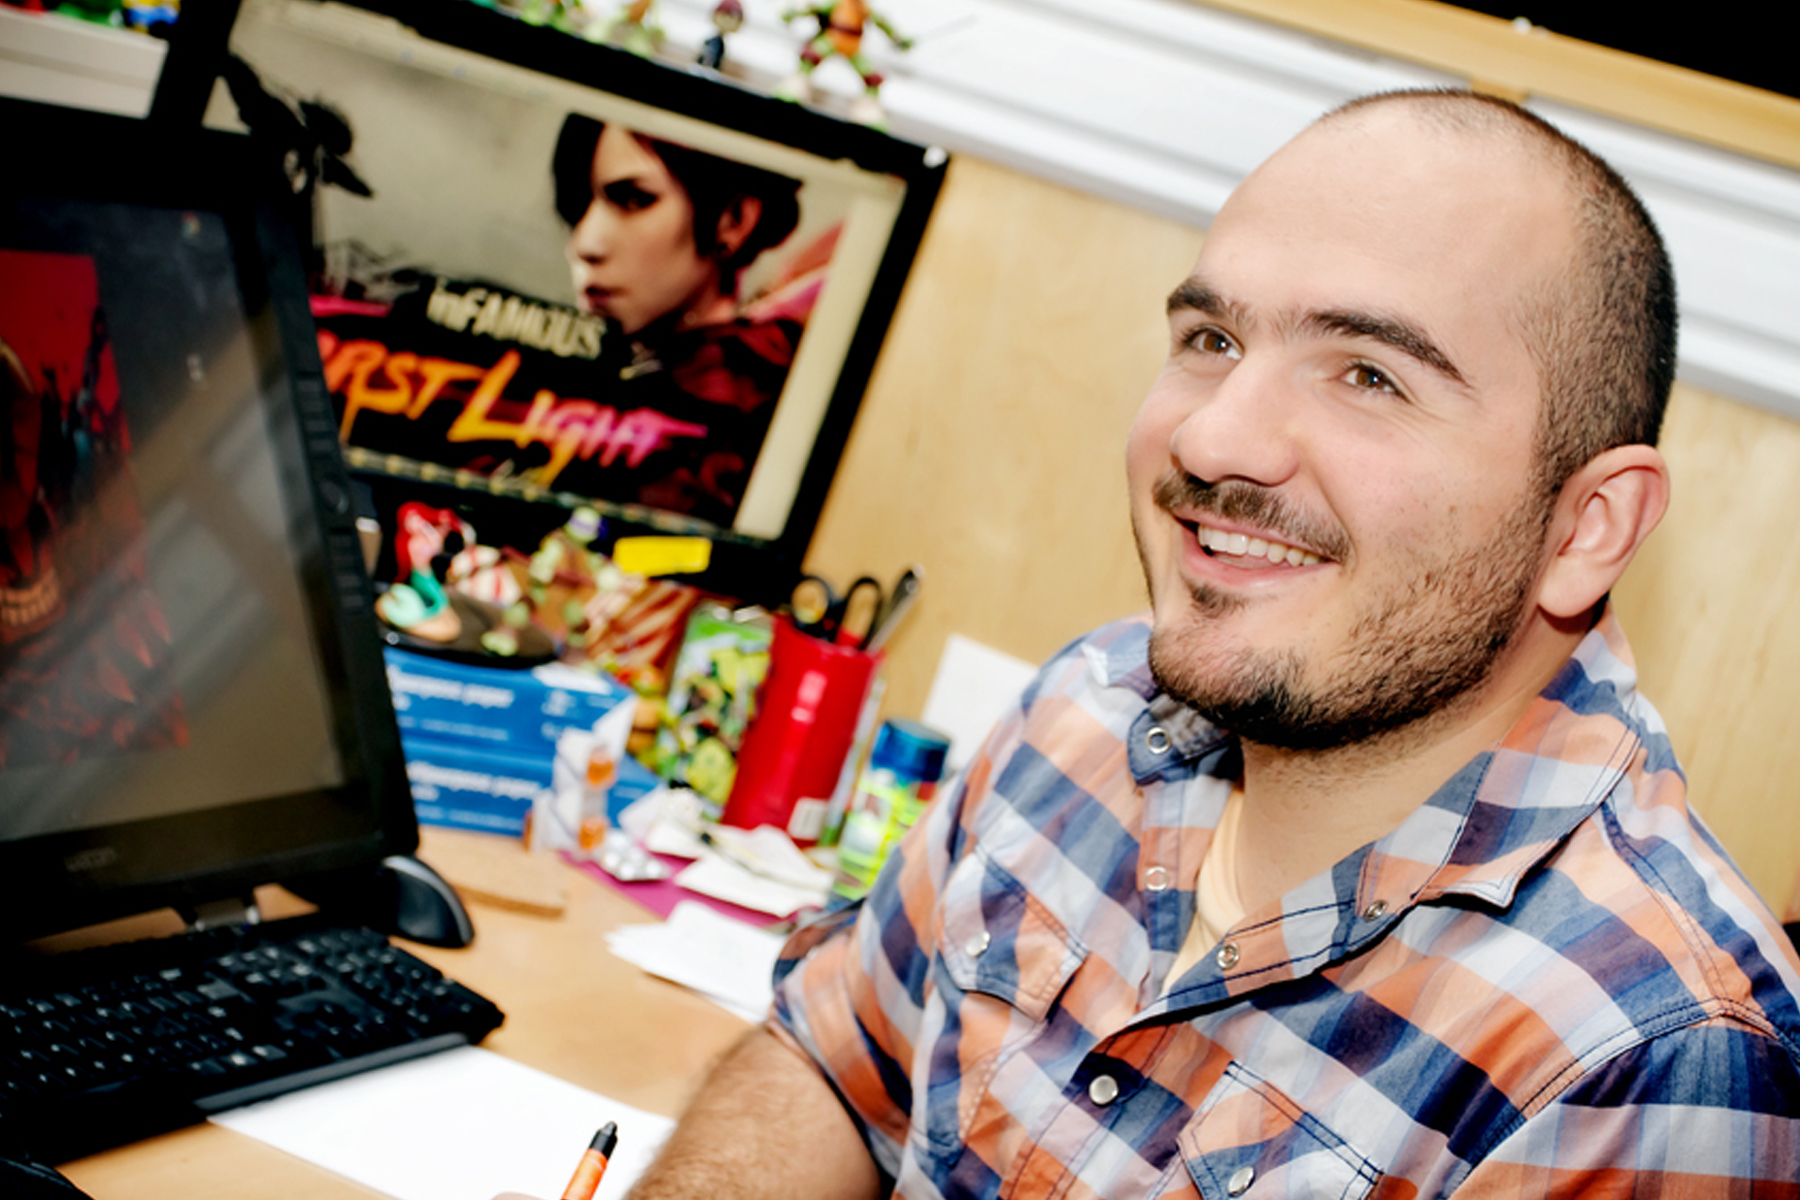 DigiPen alumnus Horia Dociu smiling at his desk in the Sucker Punch Productions office